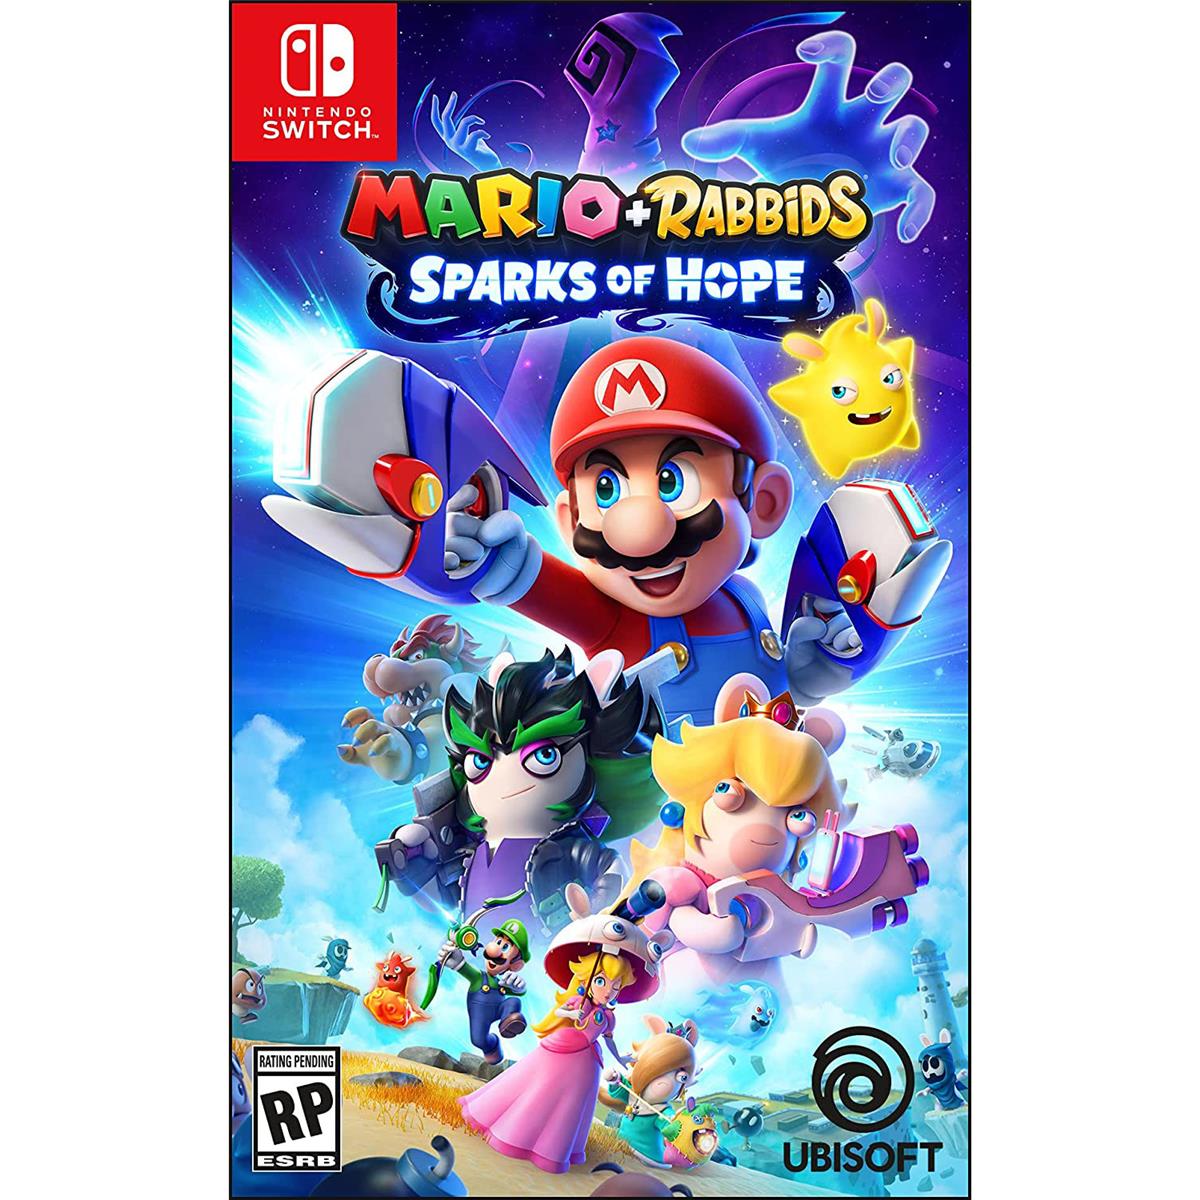 Image of Ubisoft Mario + Rabbids Sparks of Hope for Nintendo Switch